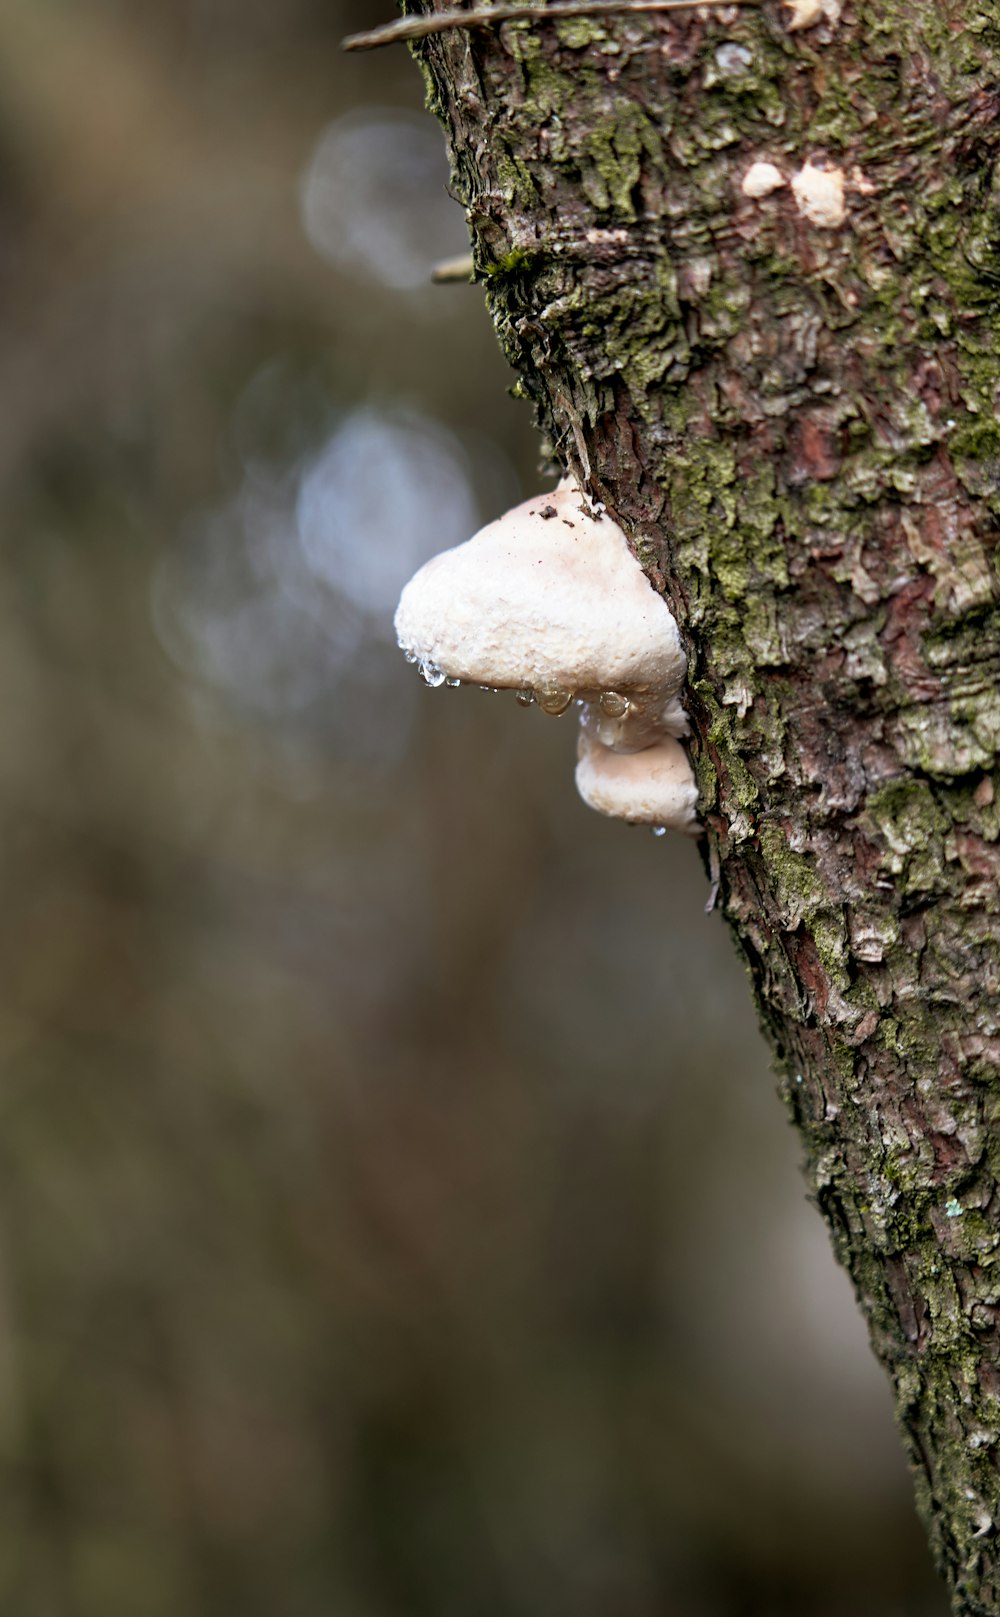 a small white mushroom growing on a tree